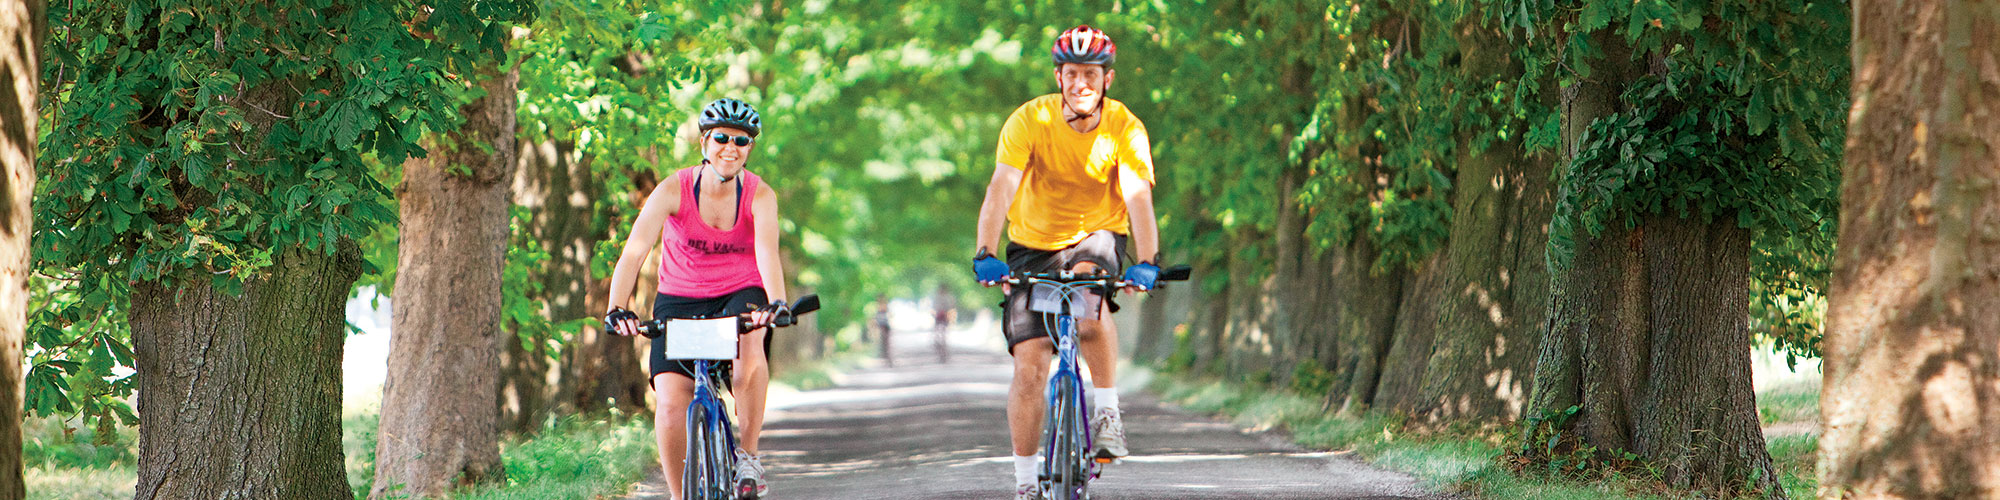 vbt bicycling vacations tours